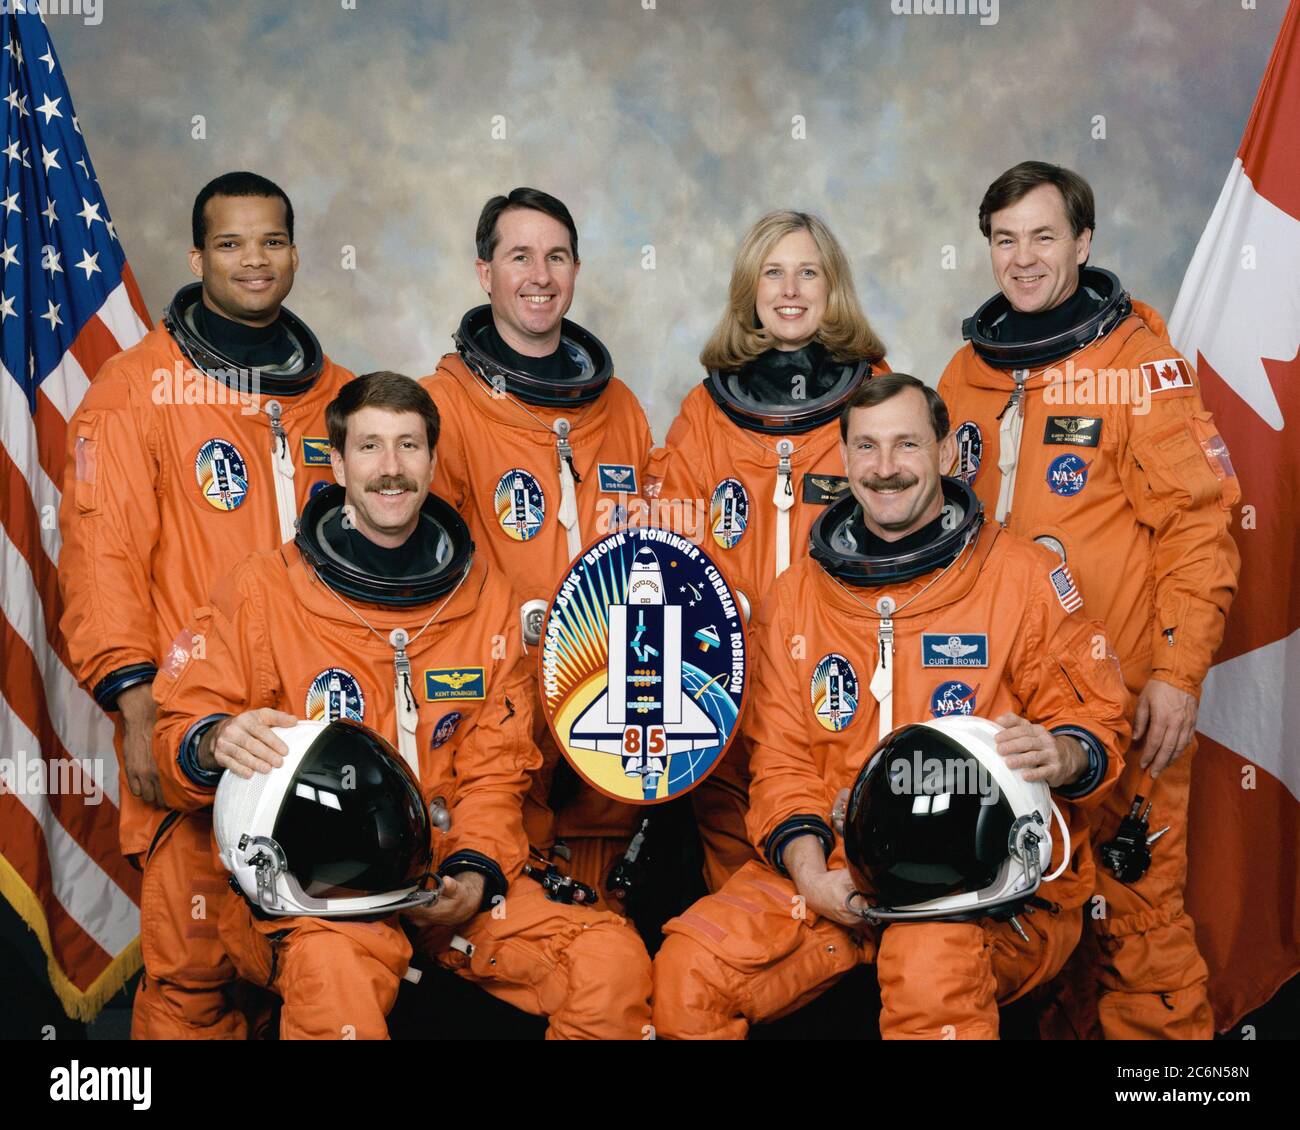 (May 1997) --- Five NASA astronauts and a Canadian payload specialist pause from their training schedule to pose for the traditional crew portrait for their mission. In front are astronauts Curtis L. Brown, Jr. (right), mission commander, and Kent V. Rominger, pilot. On the back row, from the left, are astronauts Robert L. Curbeam, Jr., Stephen K. Robinson and N. Jan Davis, all mission specialists, along with the Canadian Space Agency's (CSA) payload specialist Bjarni Tryggvason. Stock Photo